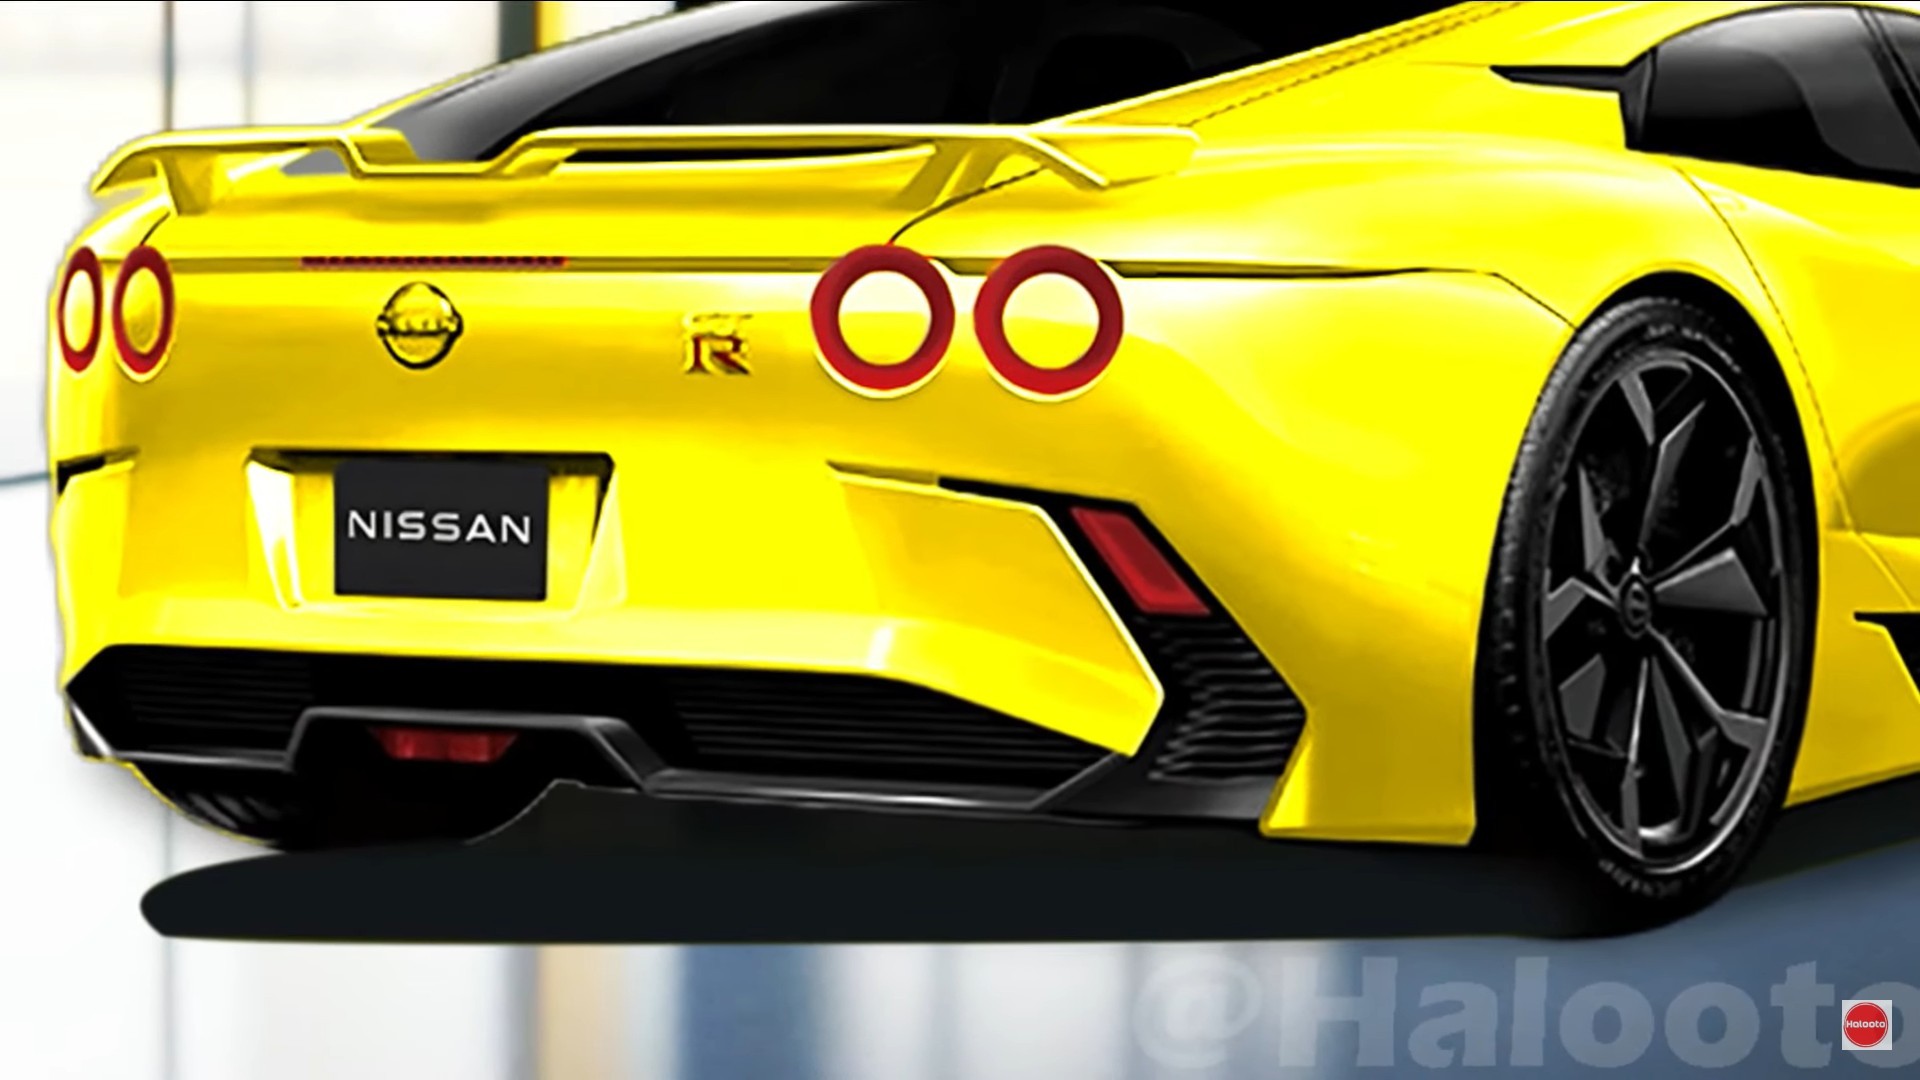 Image 7 details about Scoop – Next-gen Nissan GT-R R36 could be